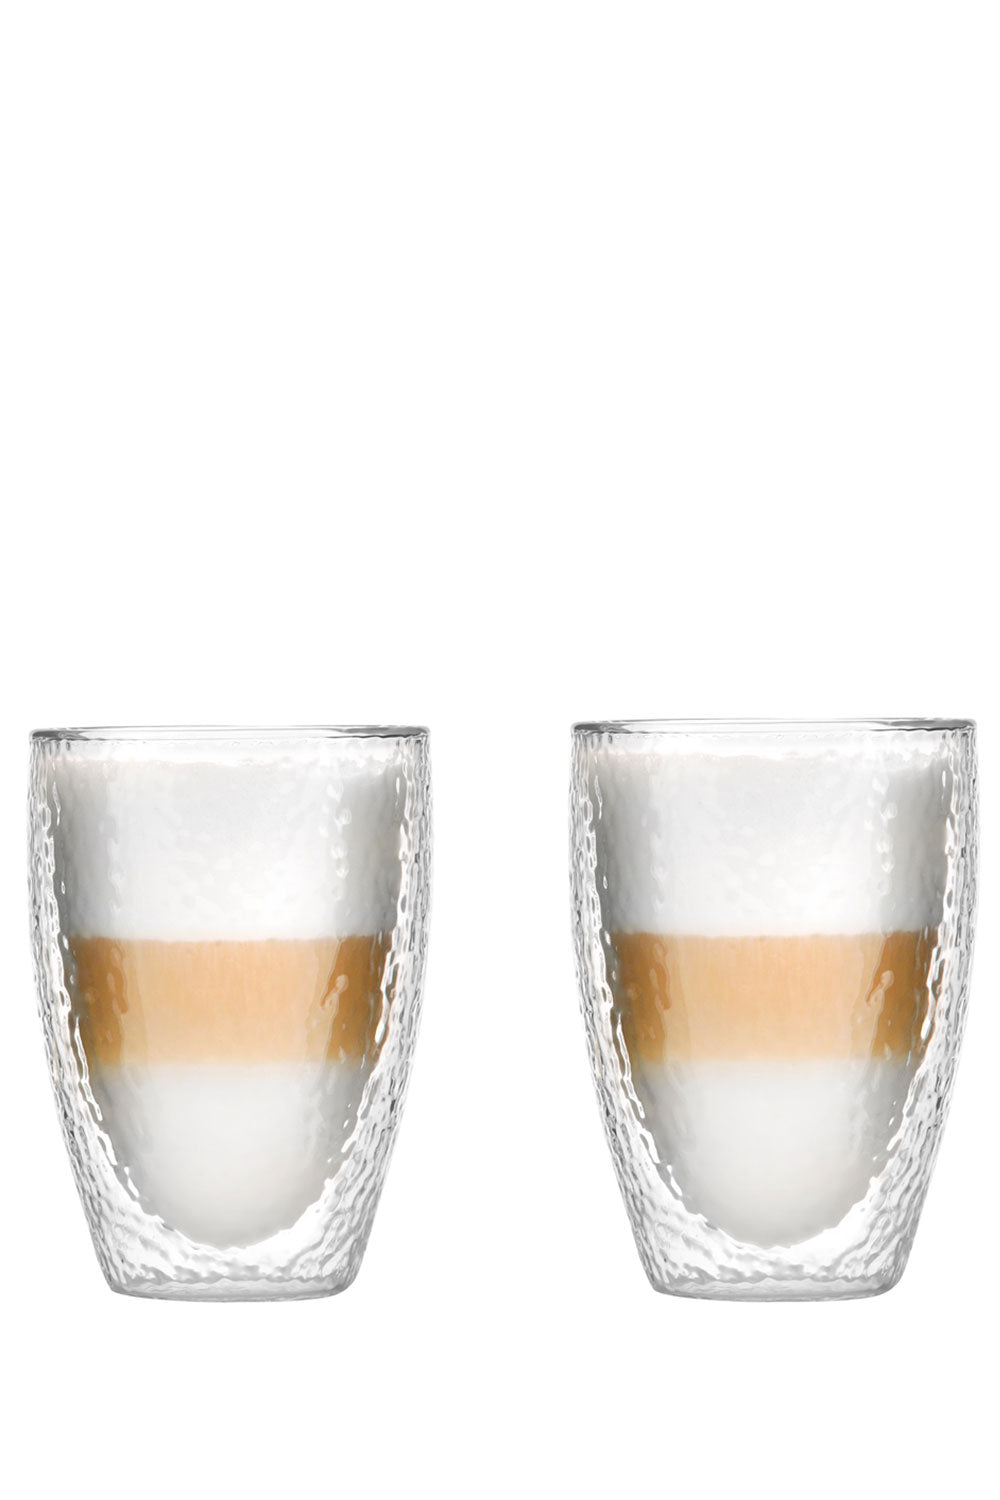 Set Of 2 Allessia Double Wall Glasses 350 ml - Maison7